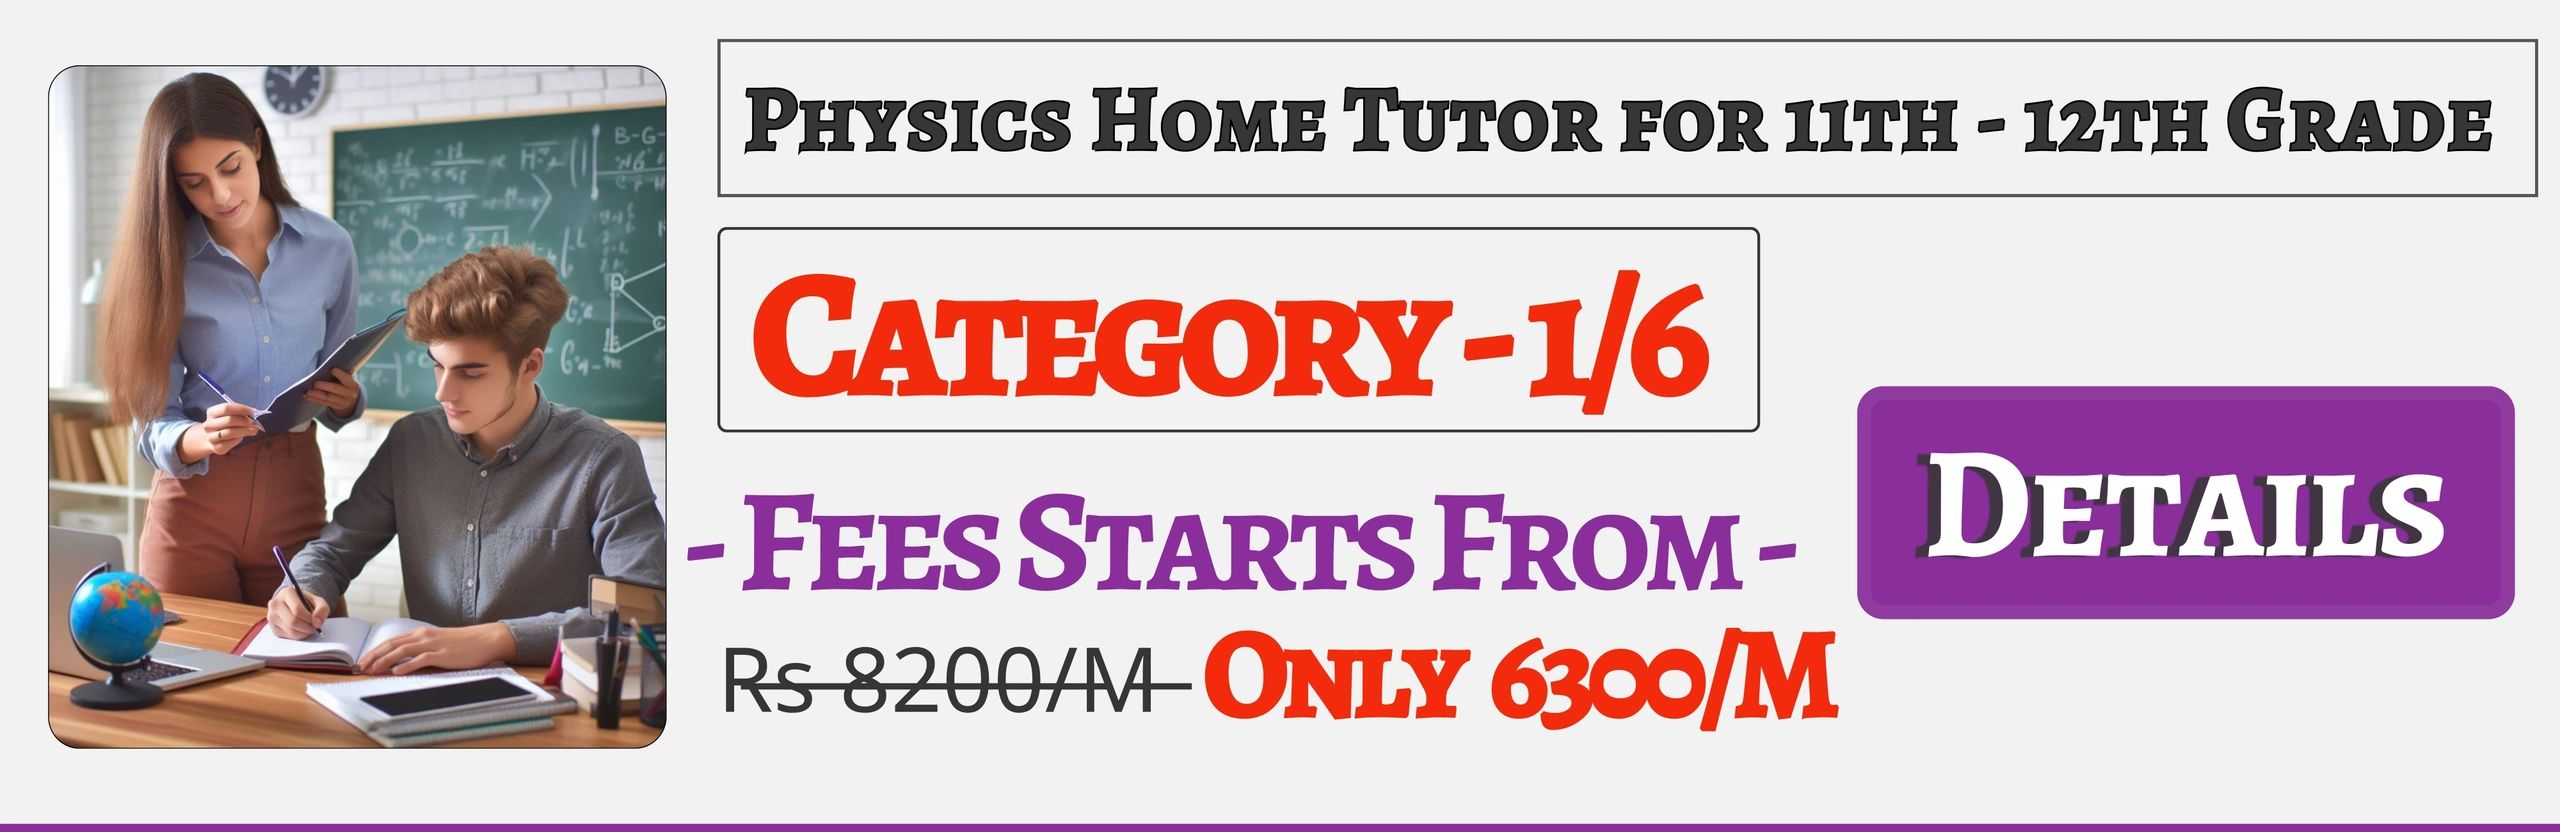 Book Best Nearby Physics Home Tuition Tutors For 11th & 12th In Jaipur , Fees Only 6300/M